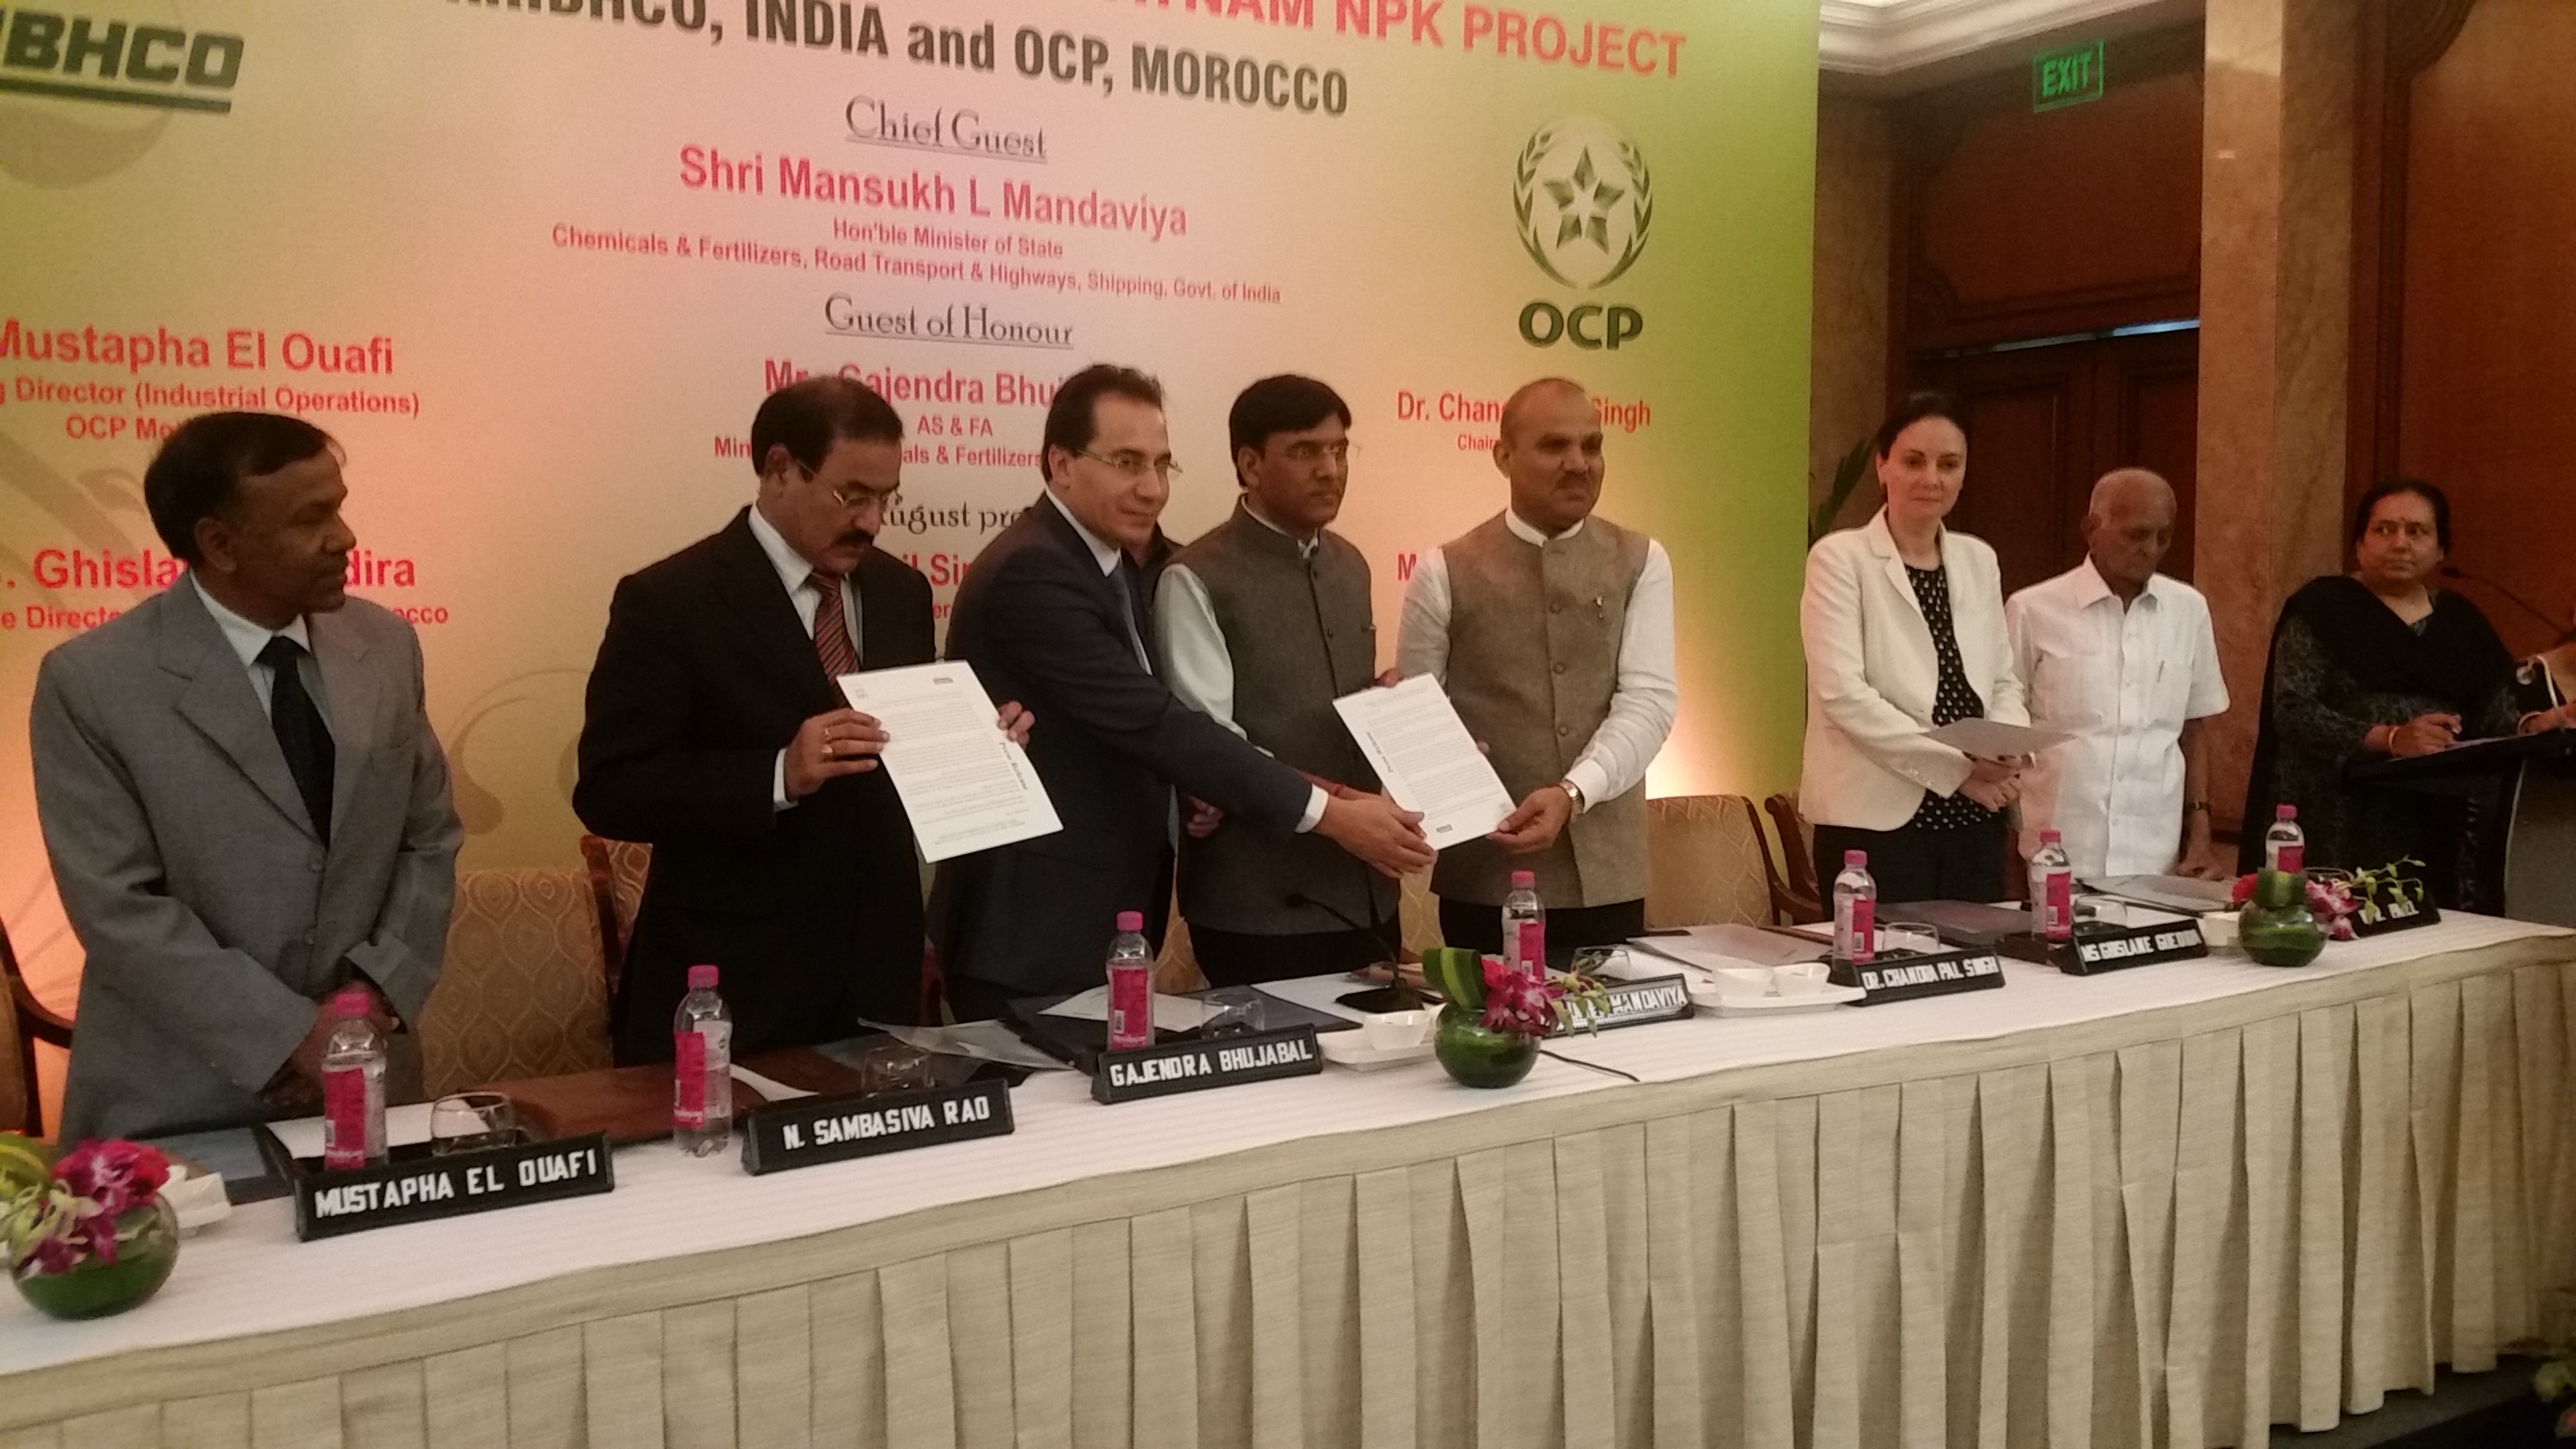 Thinking Globally: Morocco’s OCP to Build a Fertilizer Plant in India